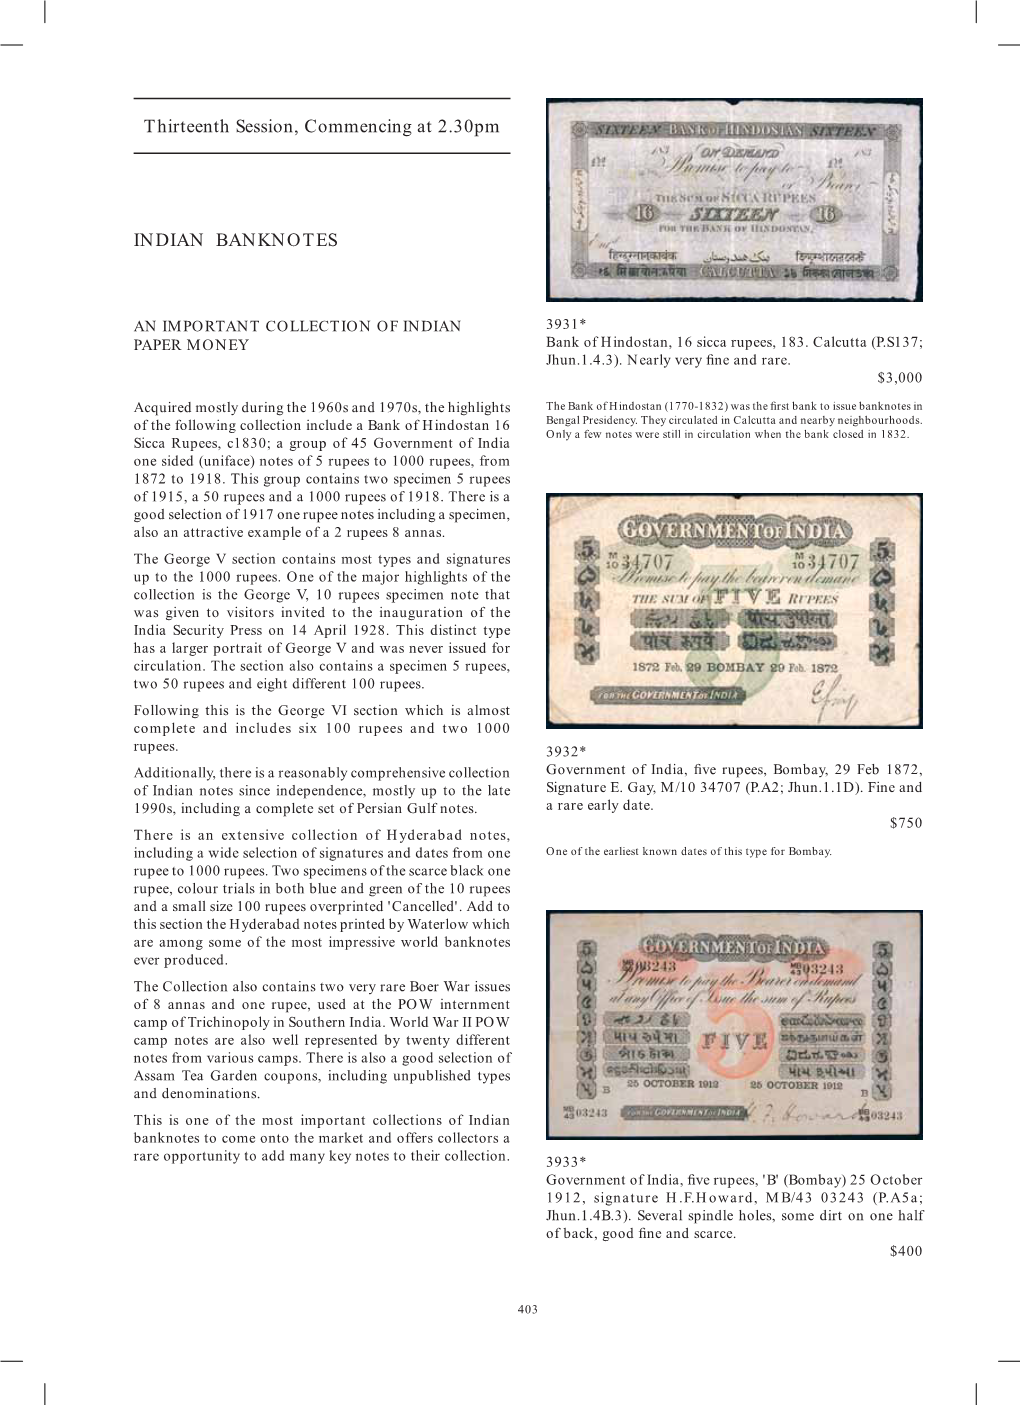 Thirteenth Session, Commencing at 2.30Pm INDIAN BANKNOTES